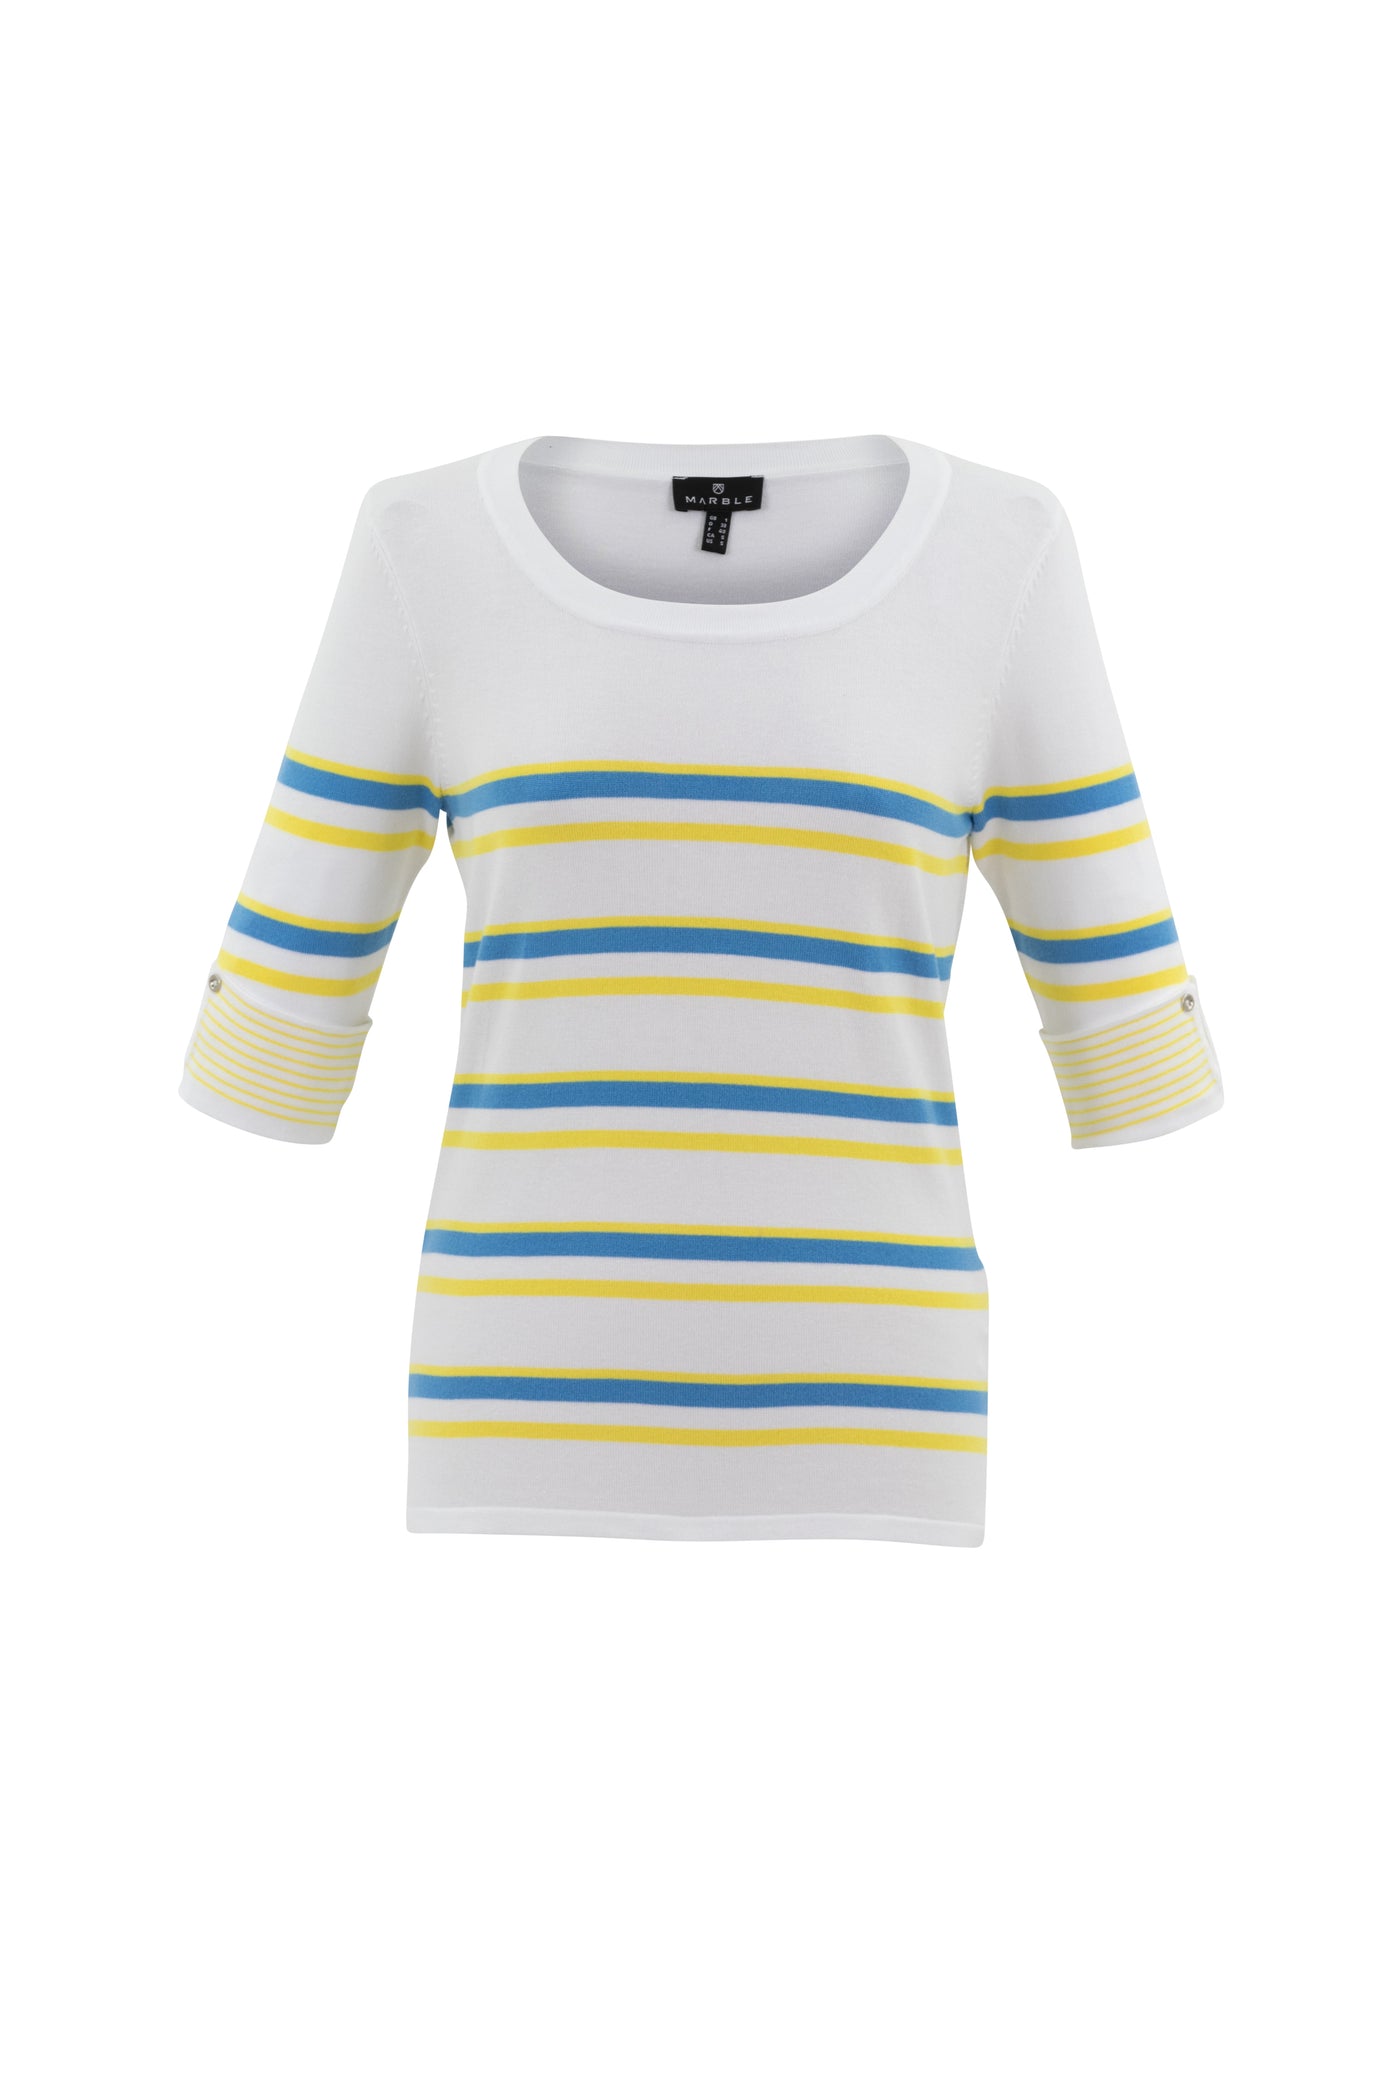 White Top With Yellow and Blue Stripes &  Turn Up Sleeve